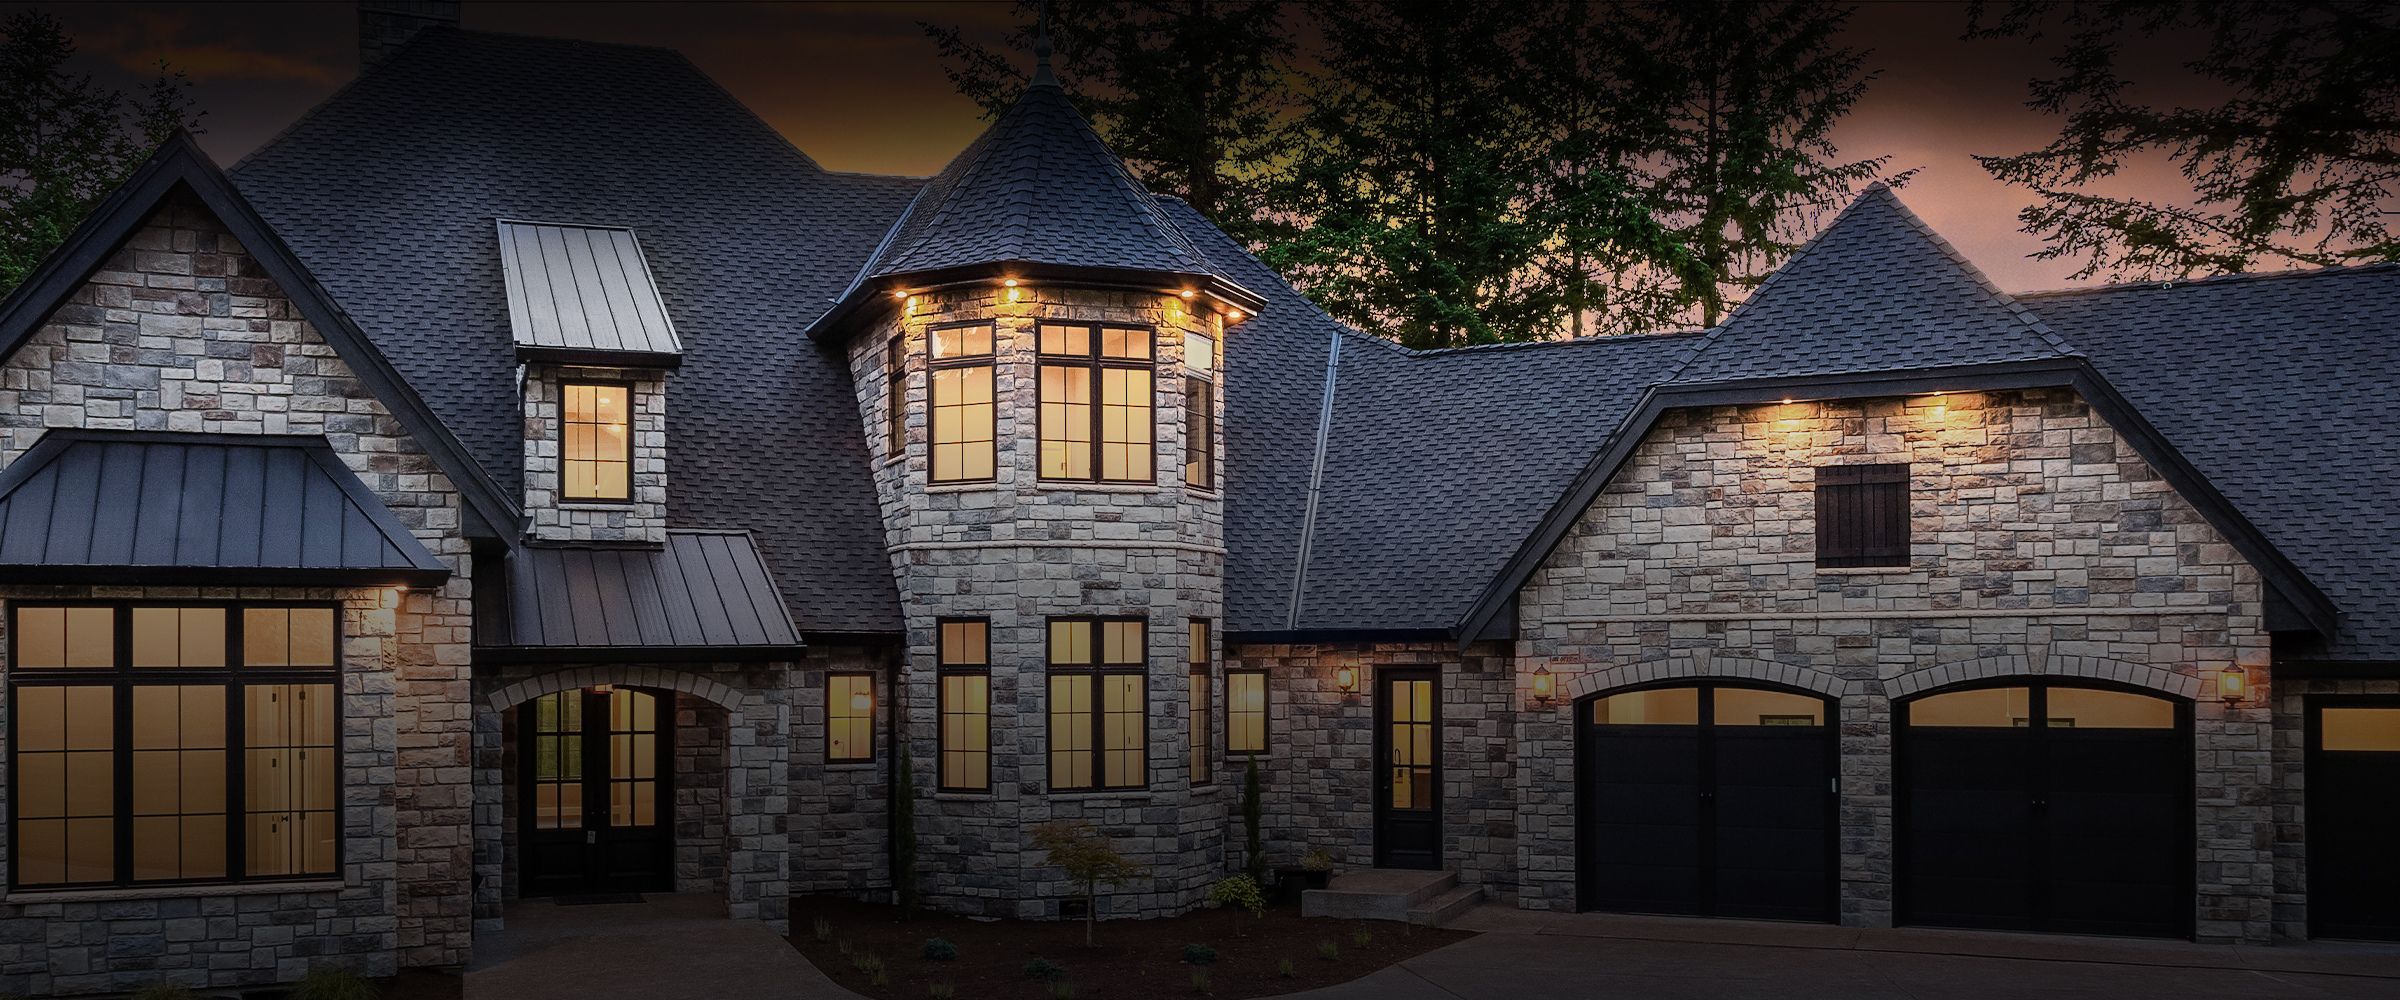 Manufactured Stone Veneer from Cultured Stone Sets this home apart and provides maintenance free living.